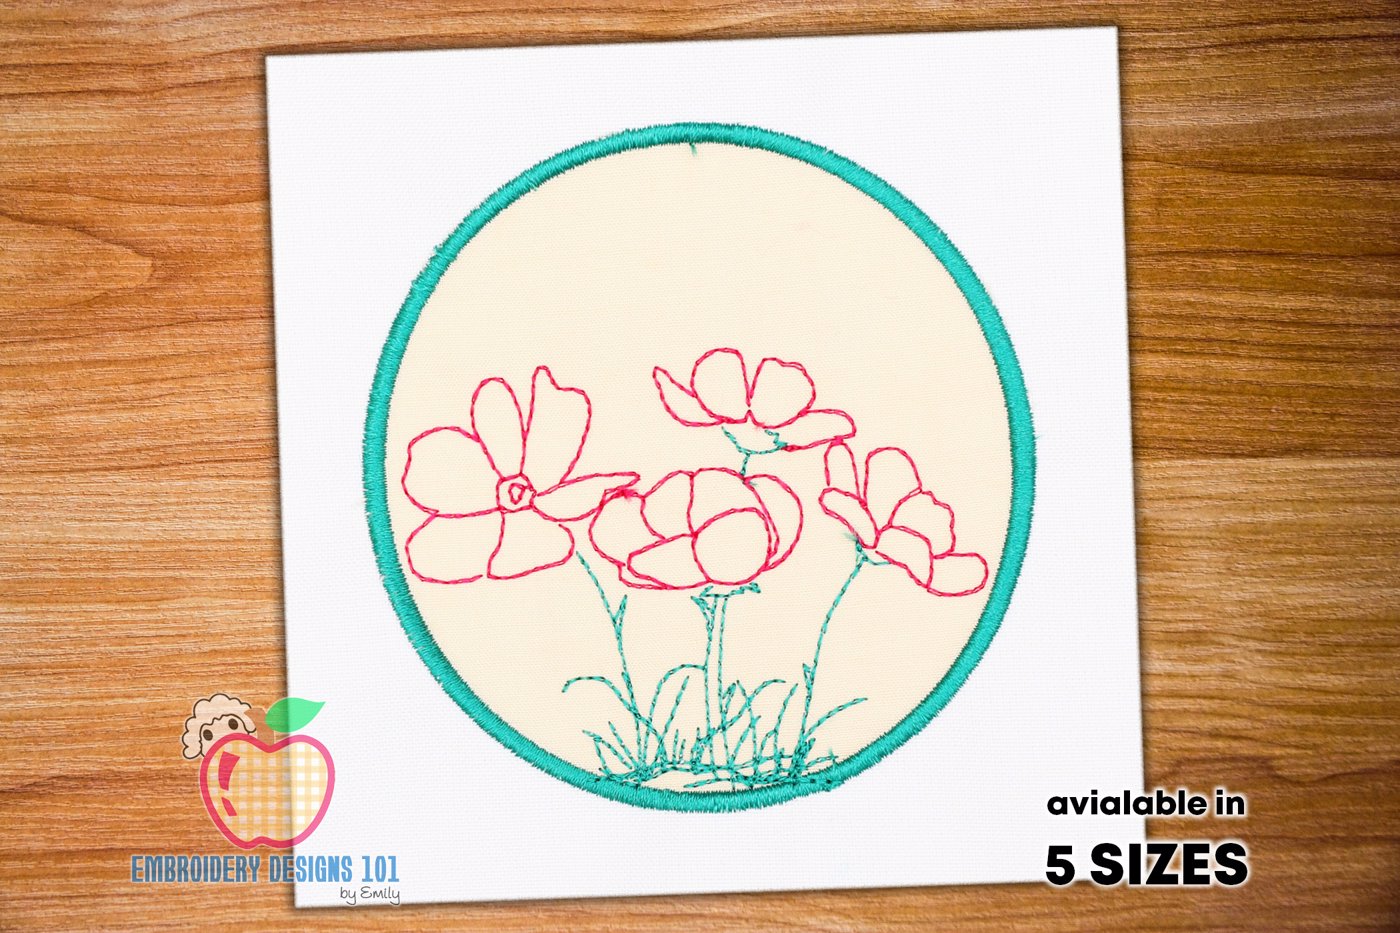 The Cosmea Flowers In The Circle Applique Pattern